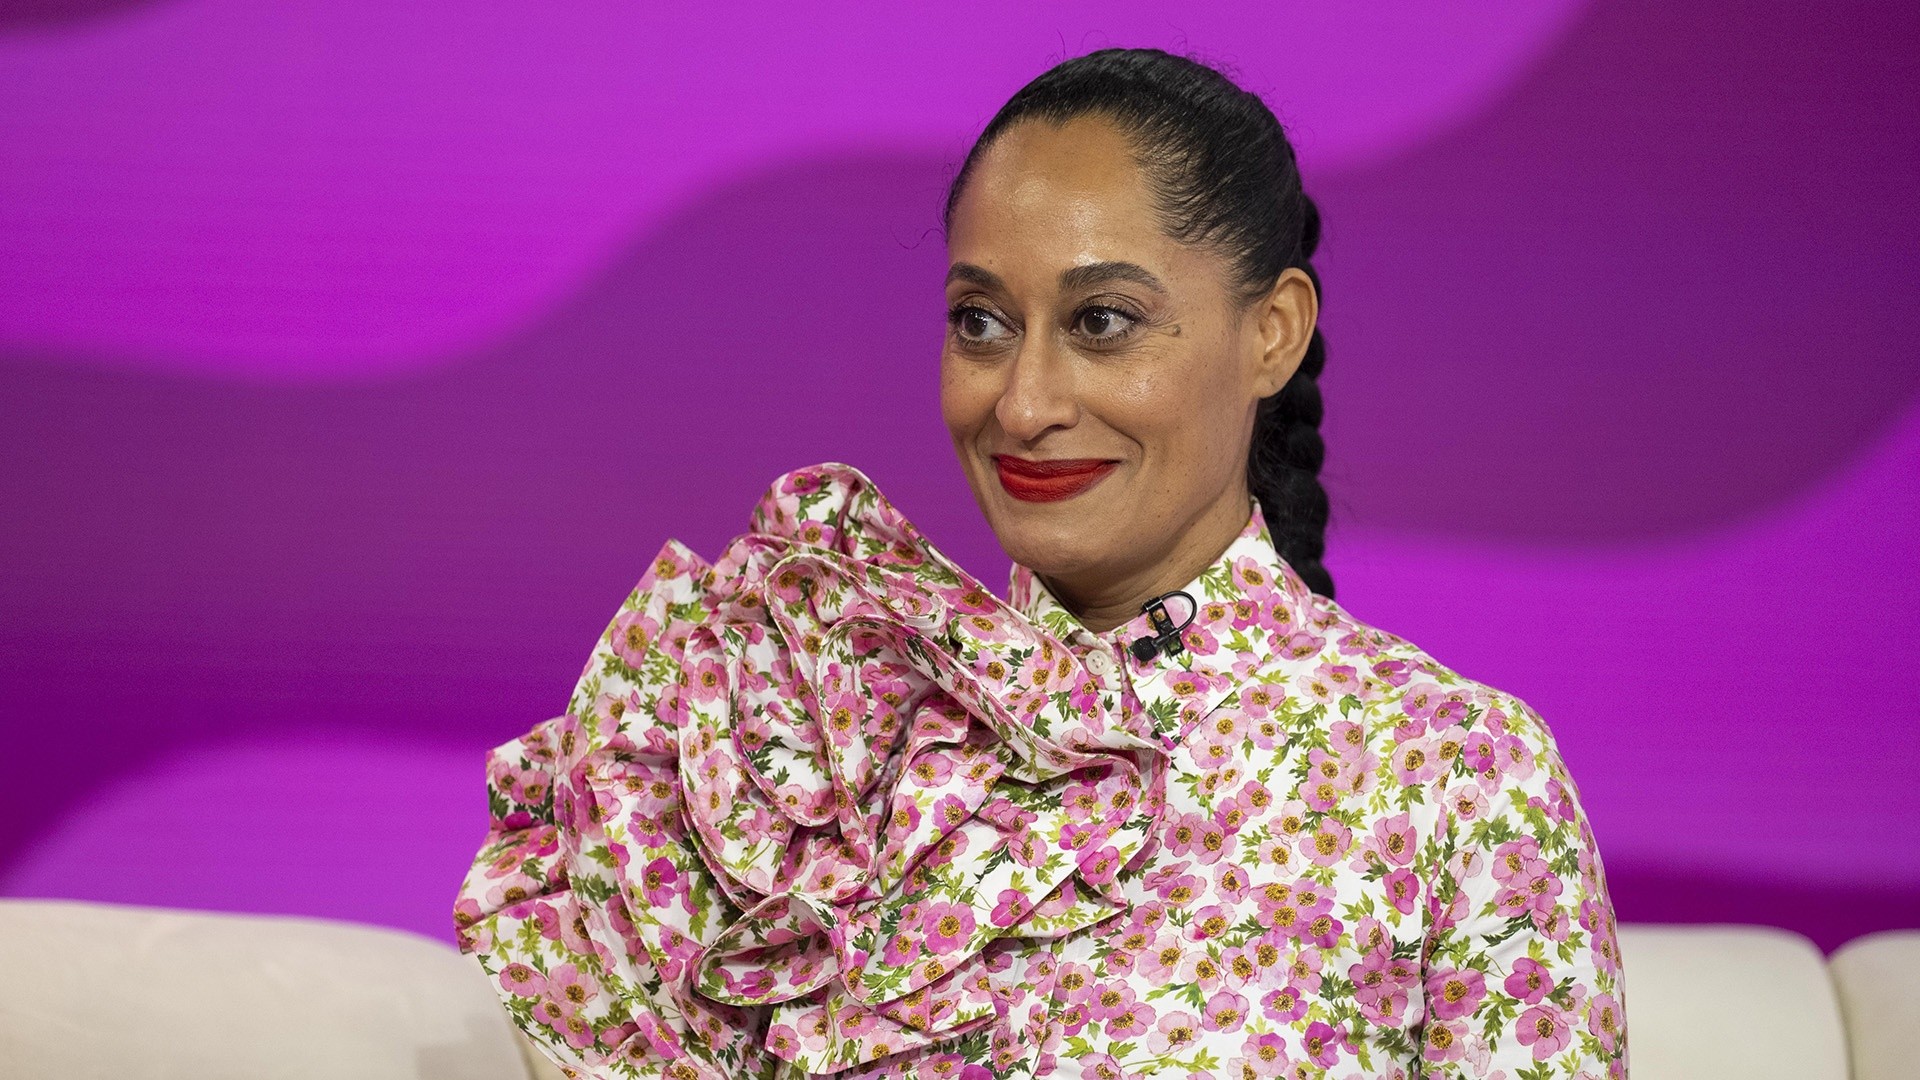 Tracee Ellis Ross recalls playing her song for mom Diana Ross